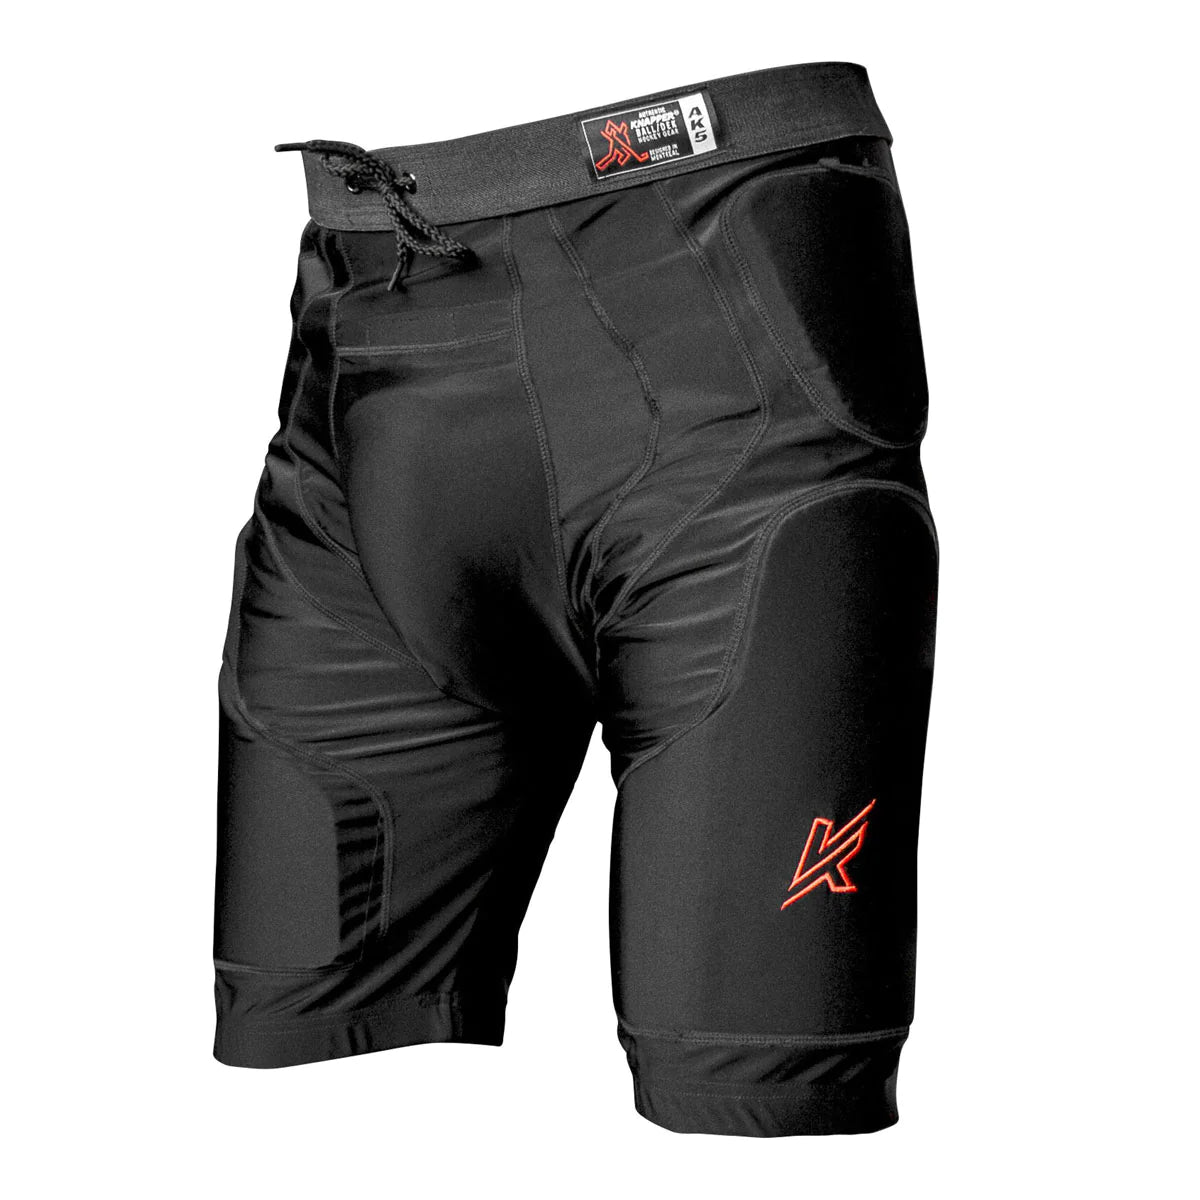 Knapper Padded Protection Shorts Girdle-Knapper-Sports Replay - Sports Excellence